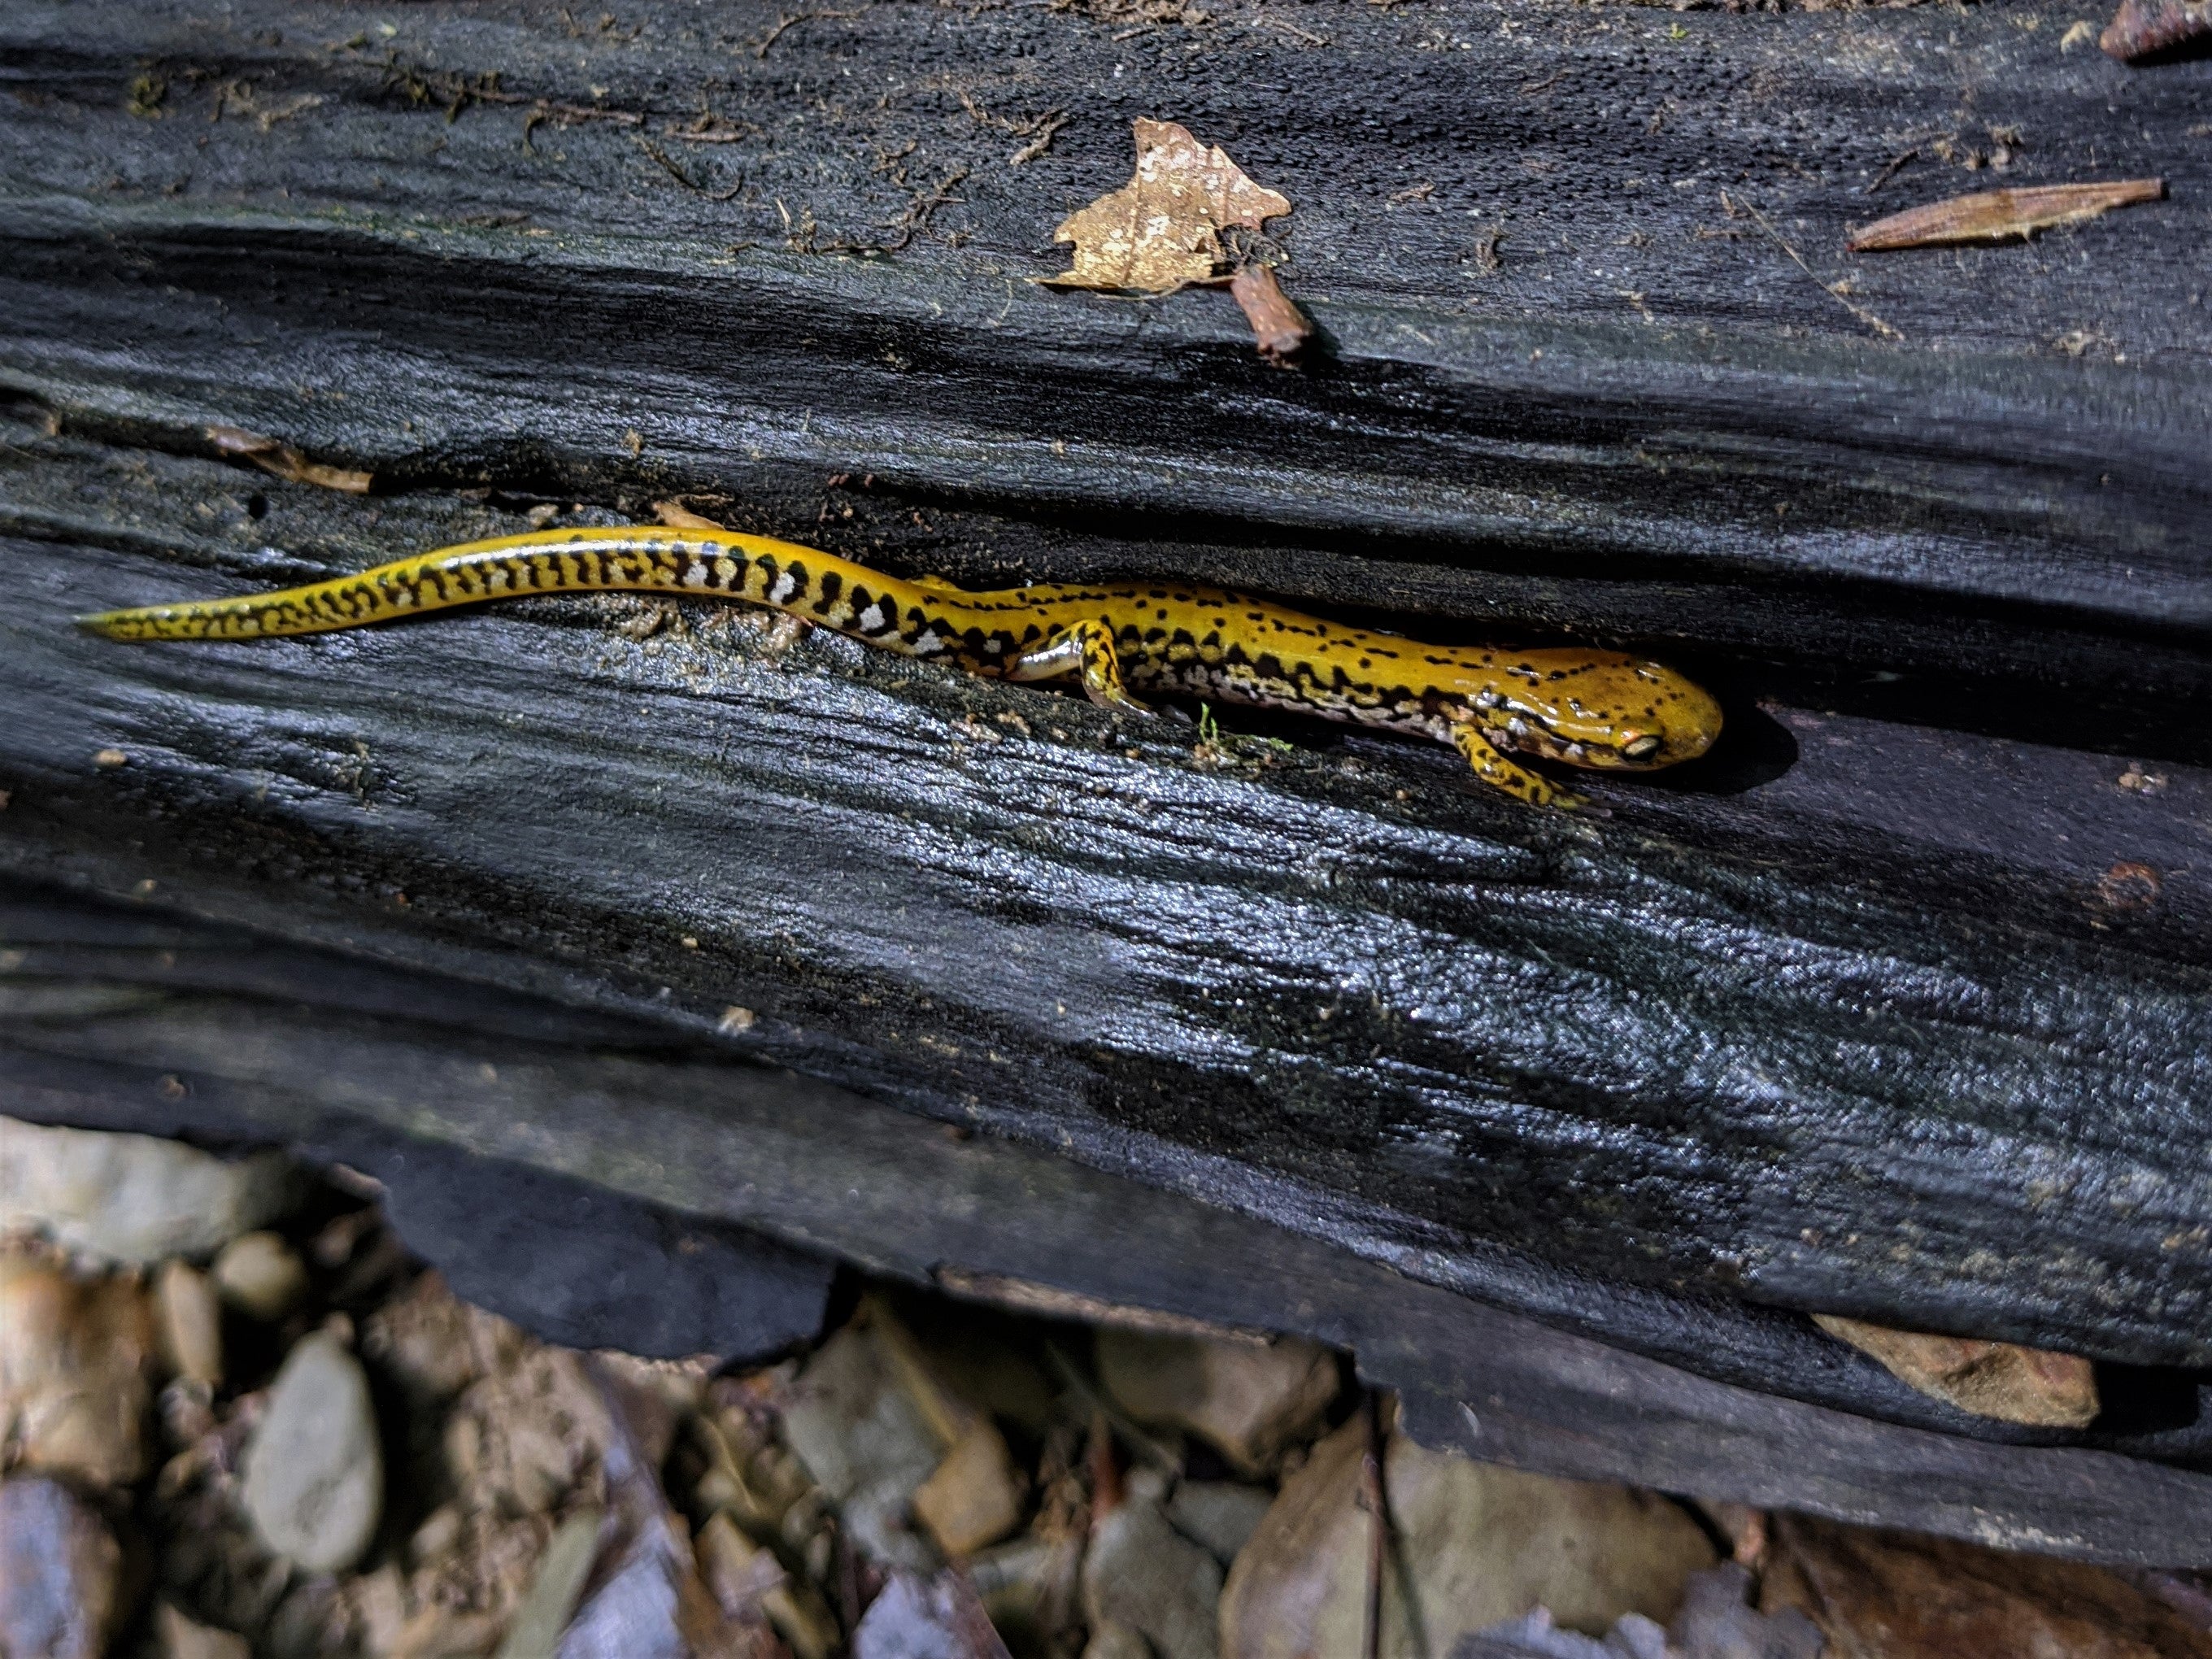 A long-tailed salamander taking shelter in a log